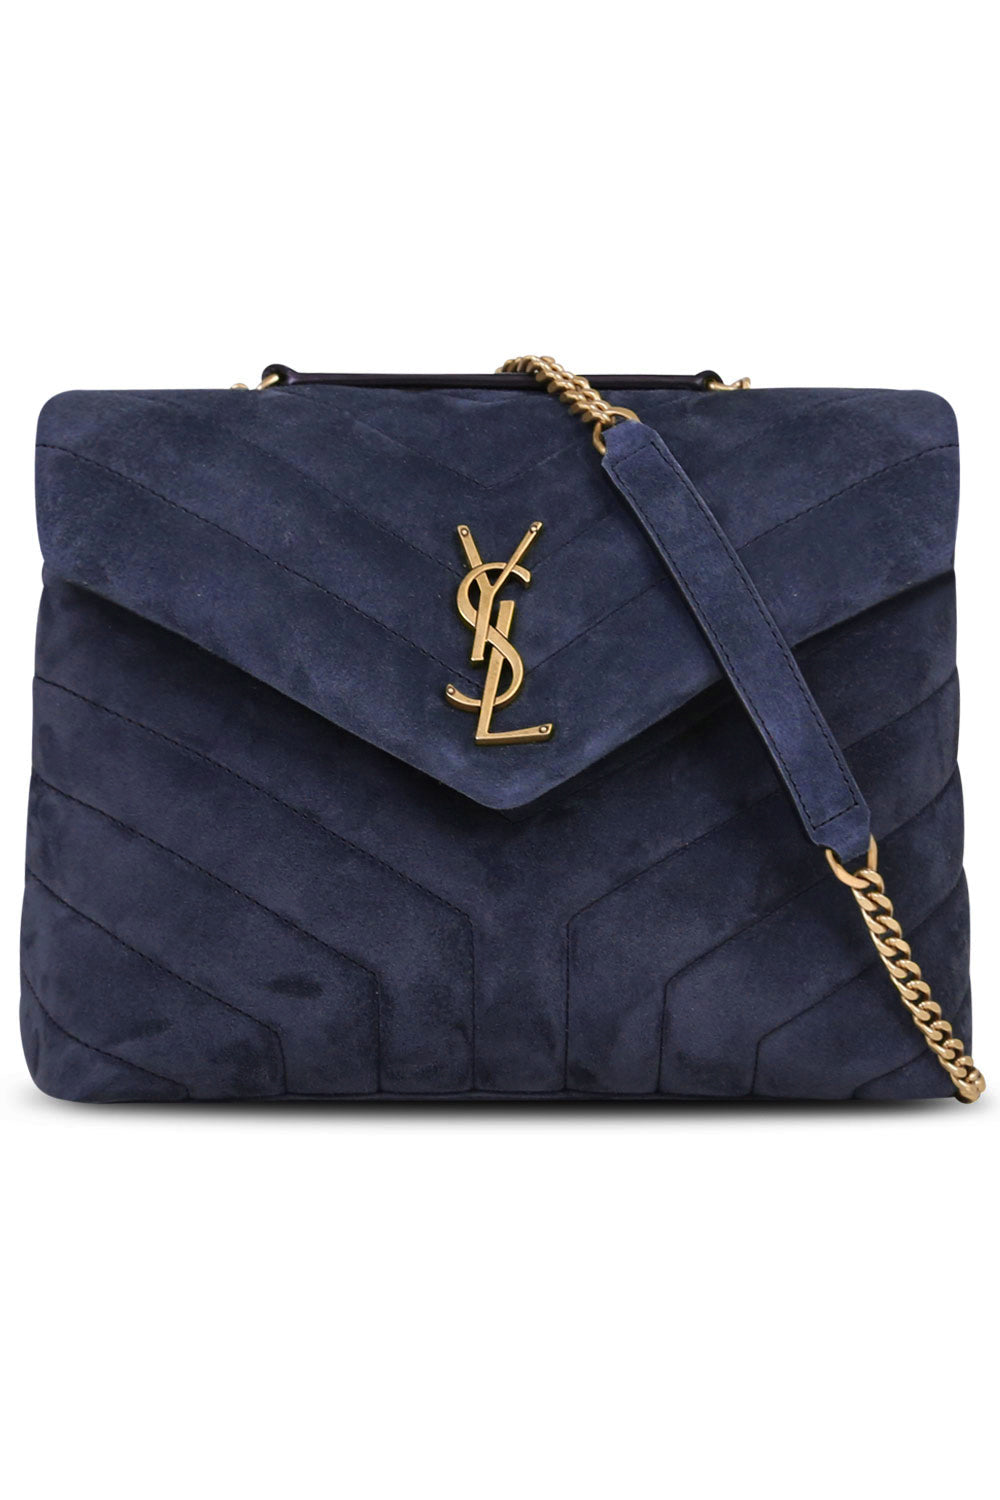 Blue Loulou small quilted leather shoulder bag, Saint Laurent